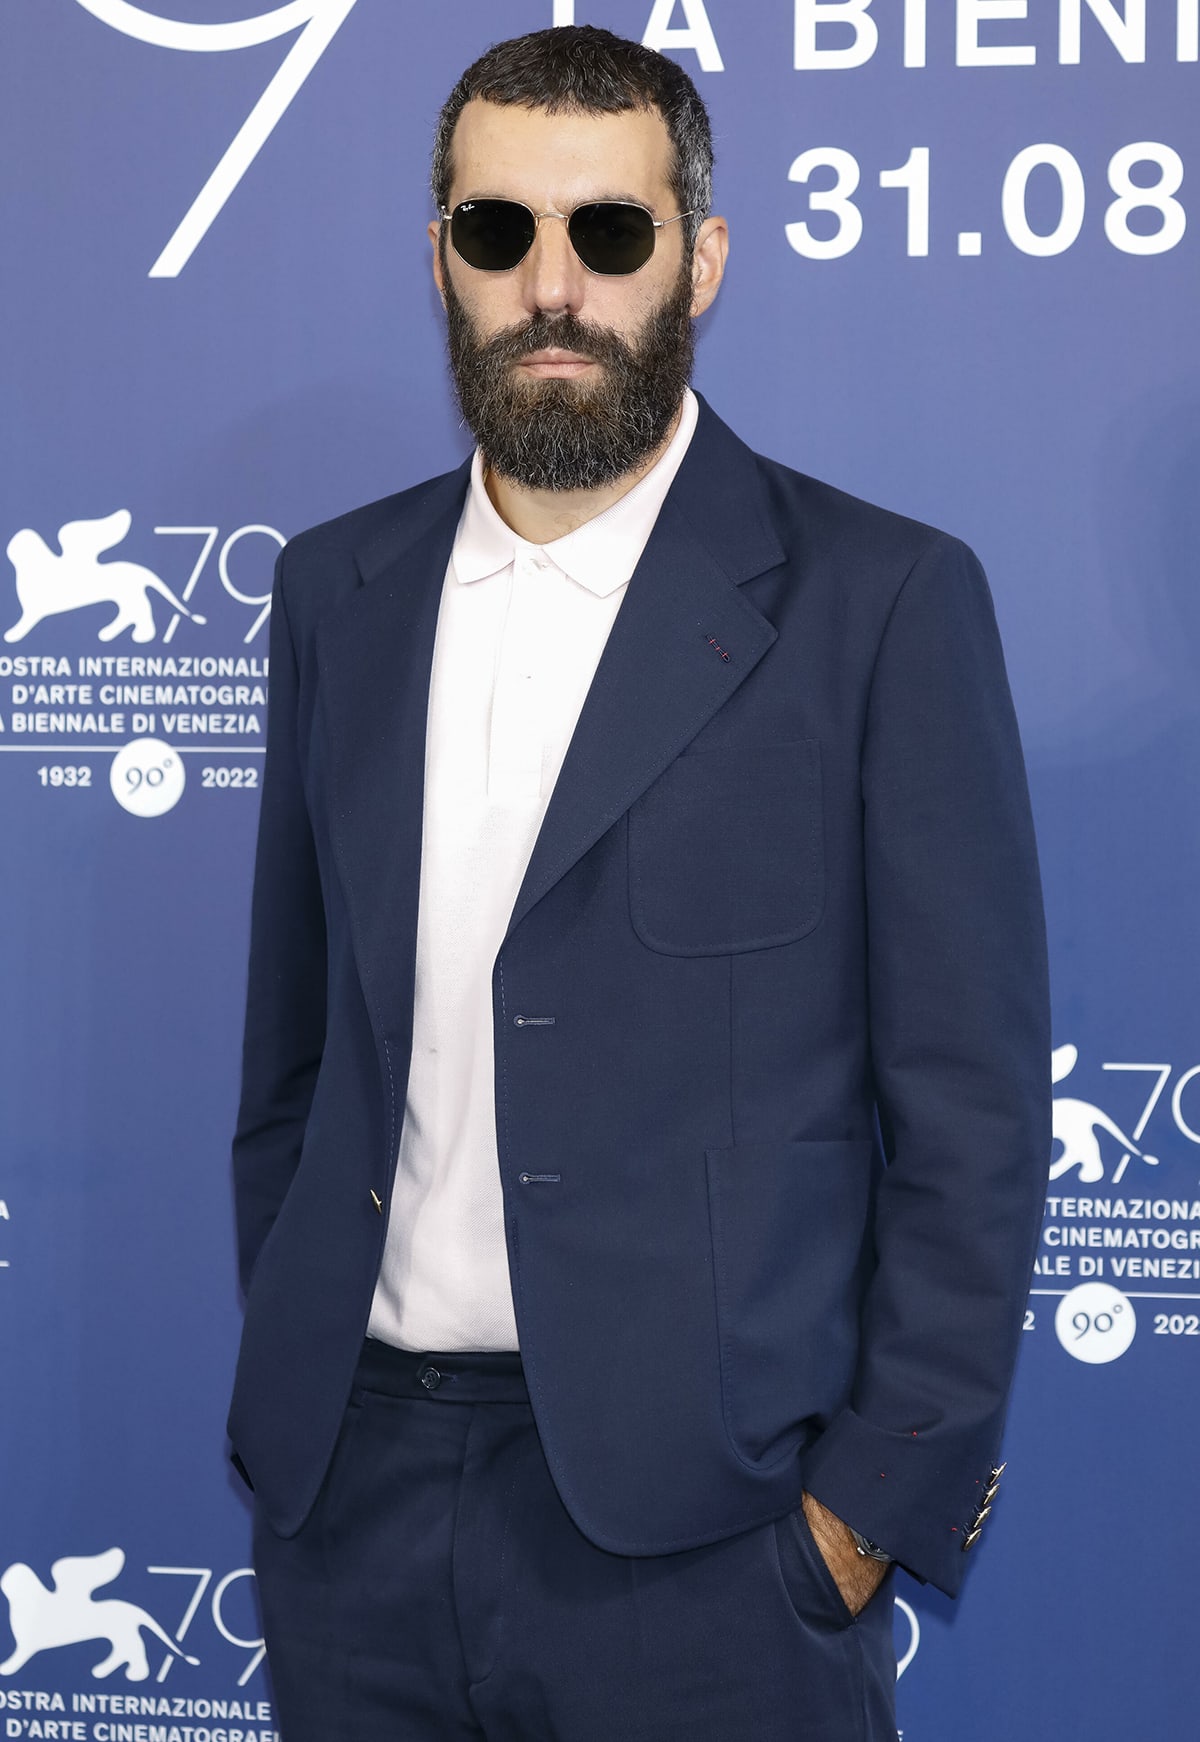 Romain Gavras is a French director that grew up in a filmmaker family 